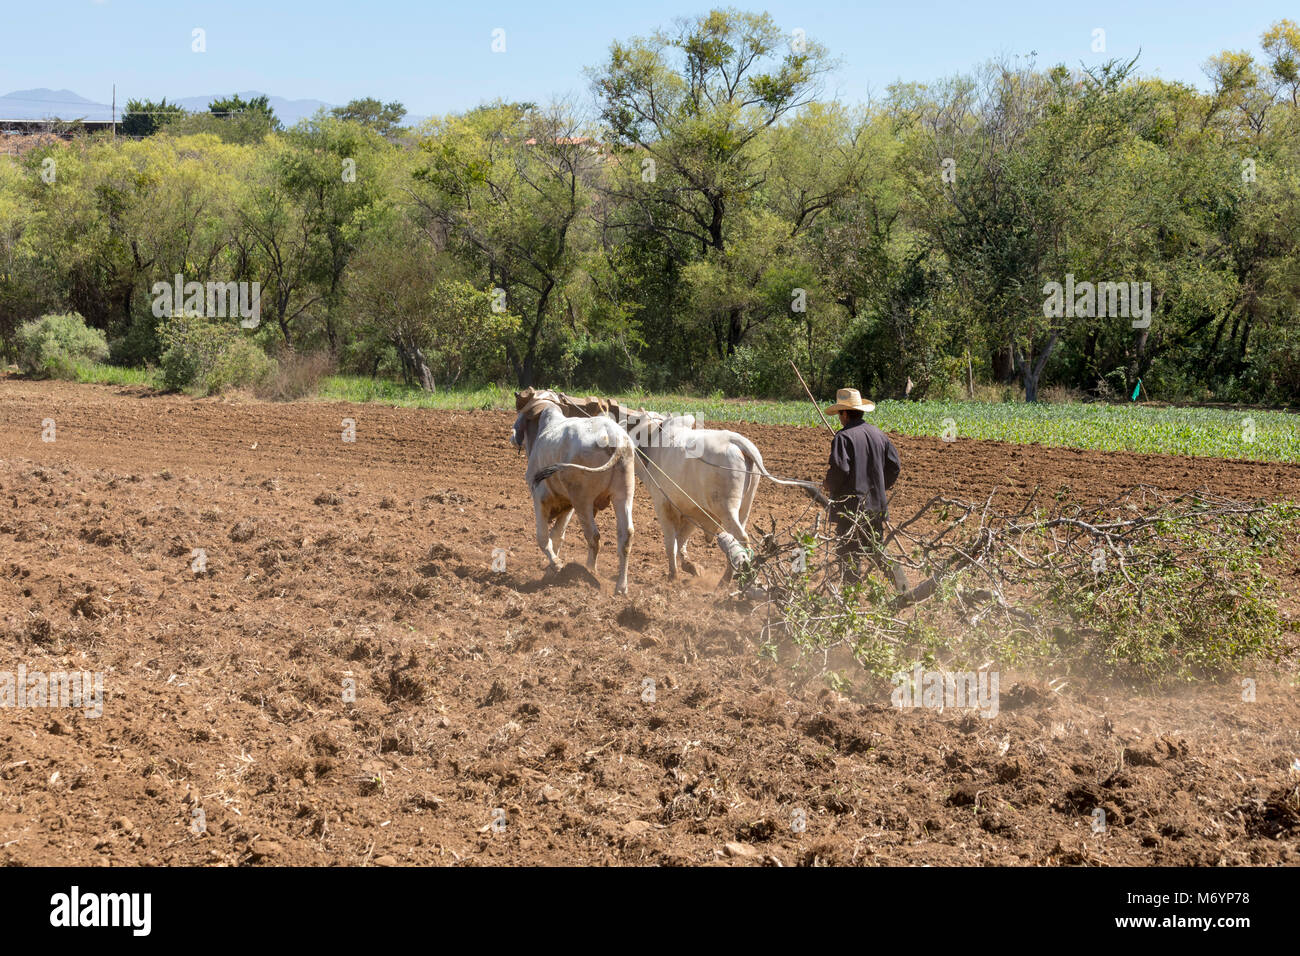 Carrizal, Oaxaca, Mexico - A farmer drives cattle pulling a large tree branch through his field in the West Etla Valley of rural Oaxaca. Stock Photo